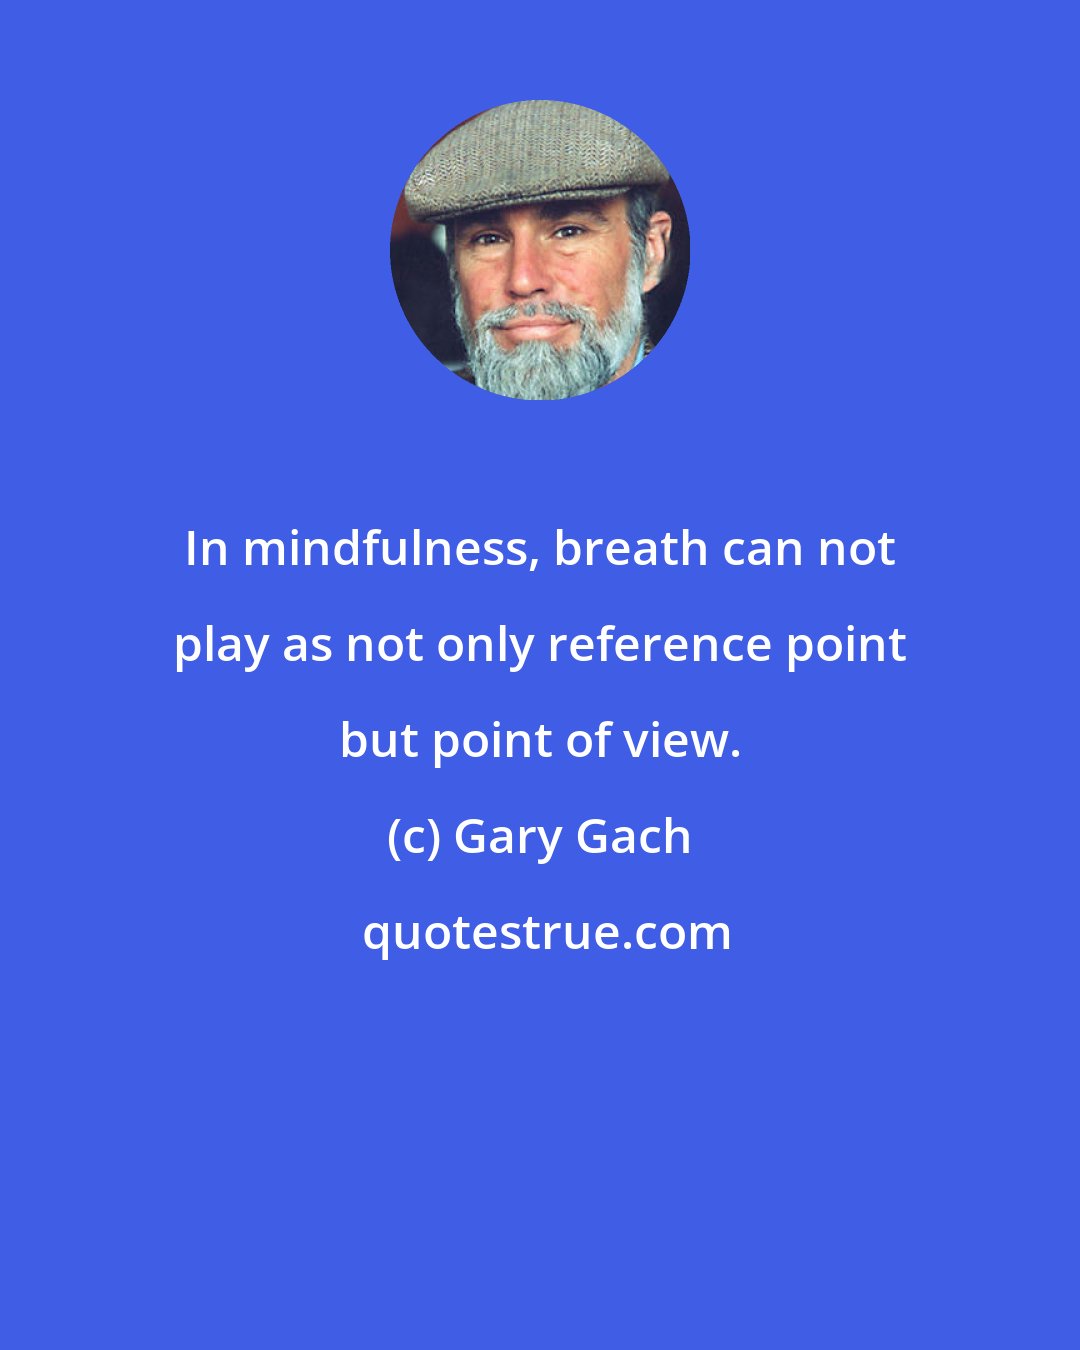 Gary Gach: In mindfulness, breath can not play as not only reference point but point of view.